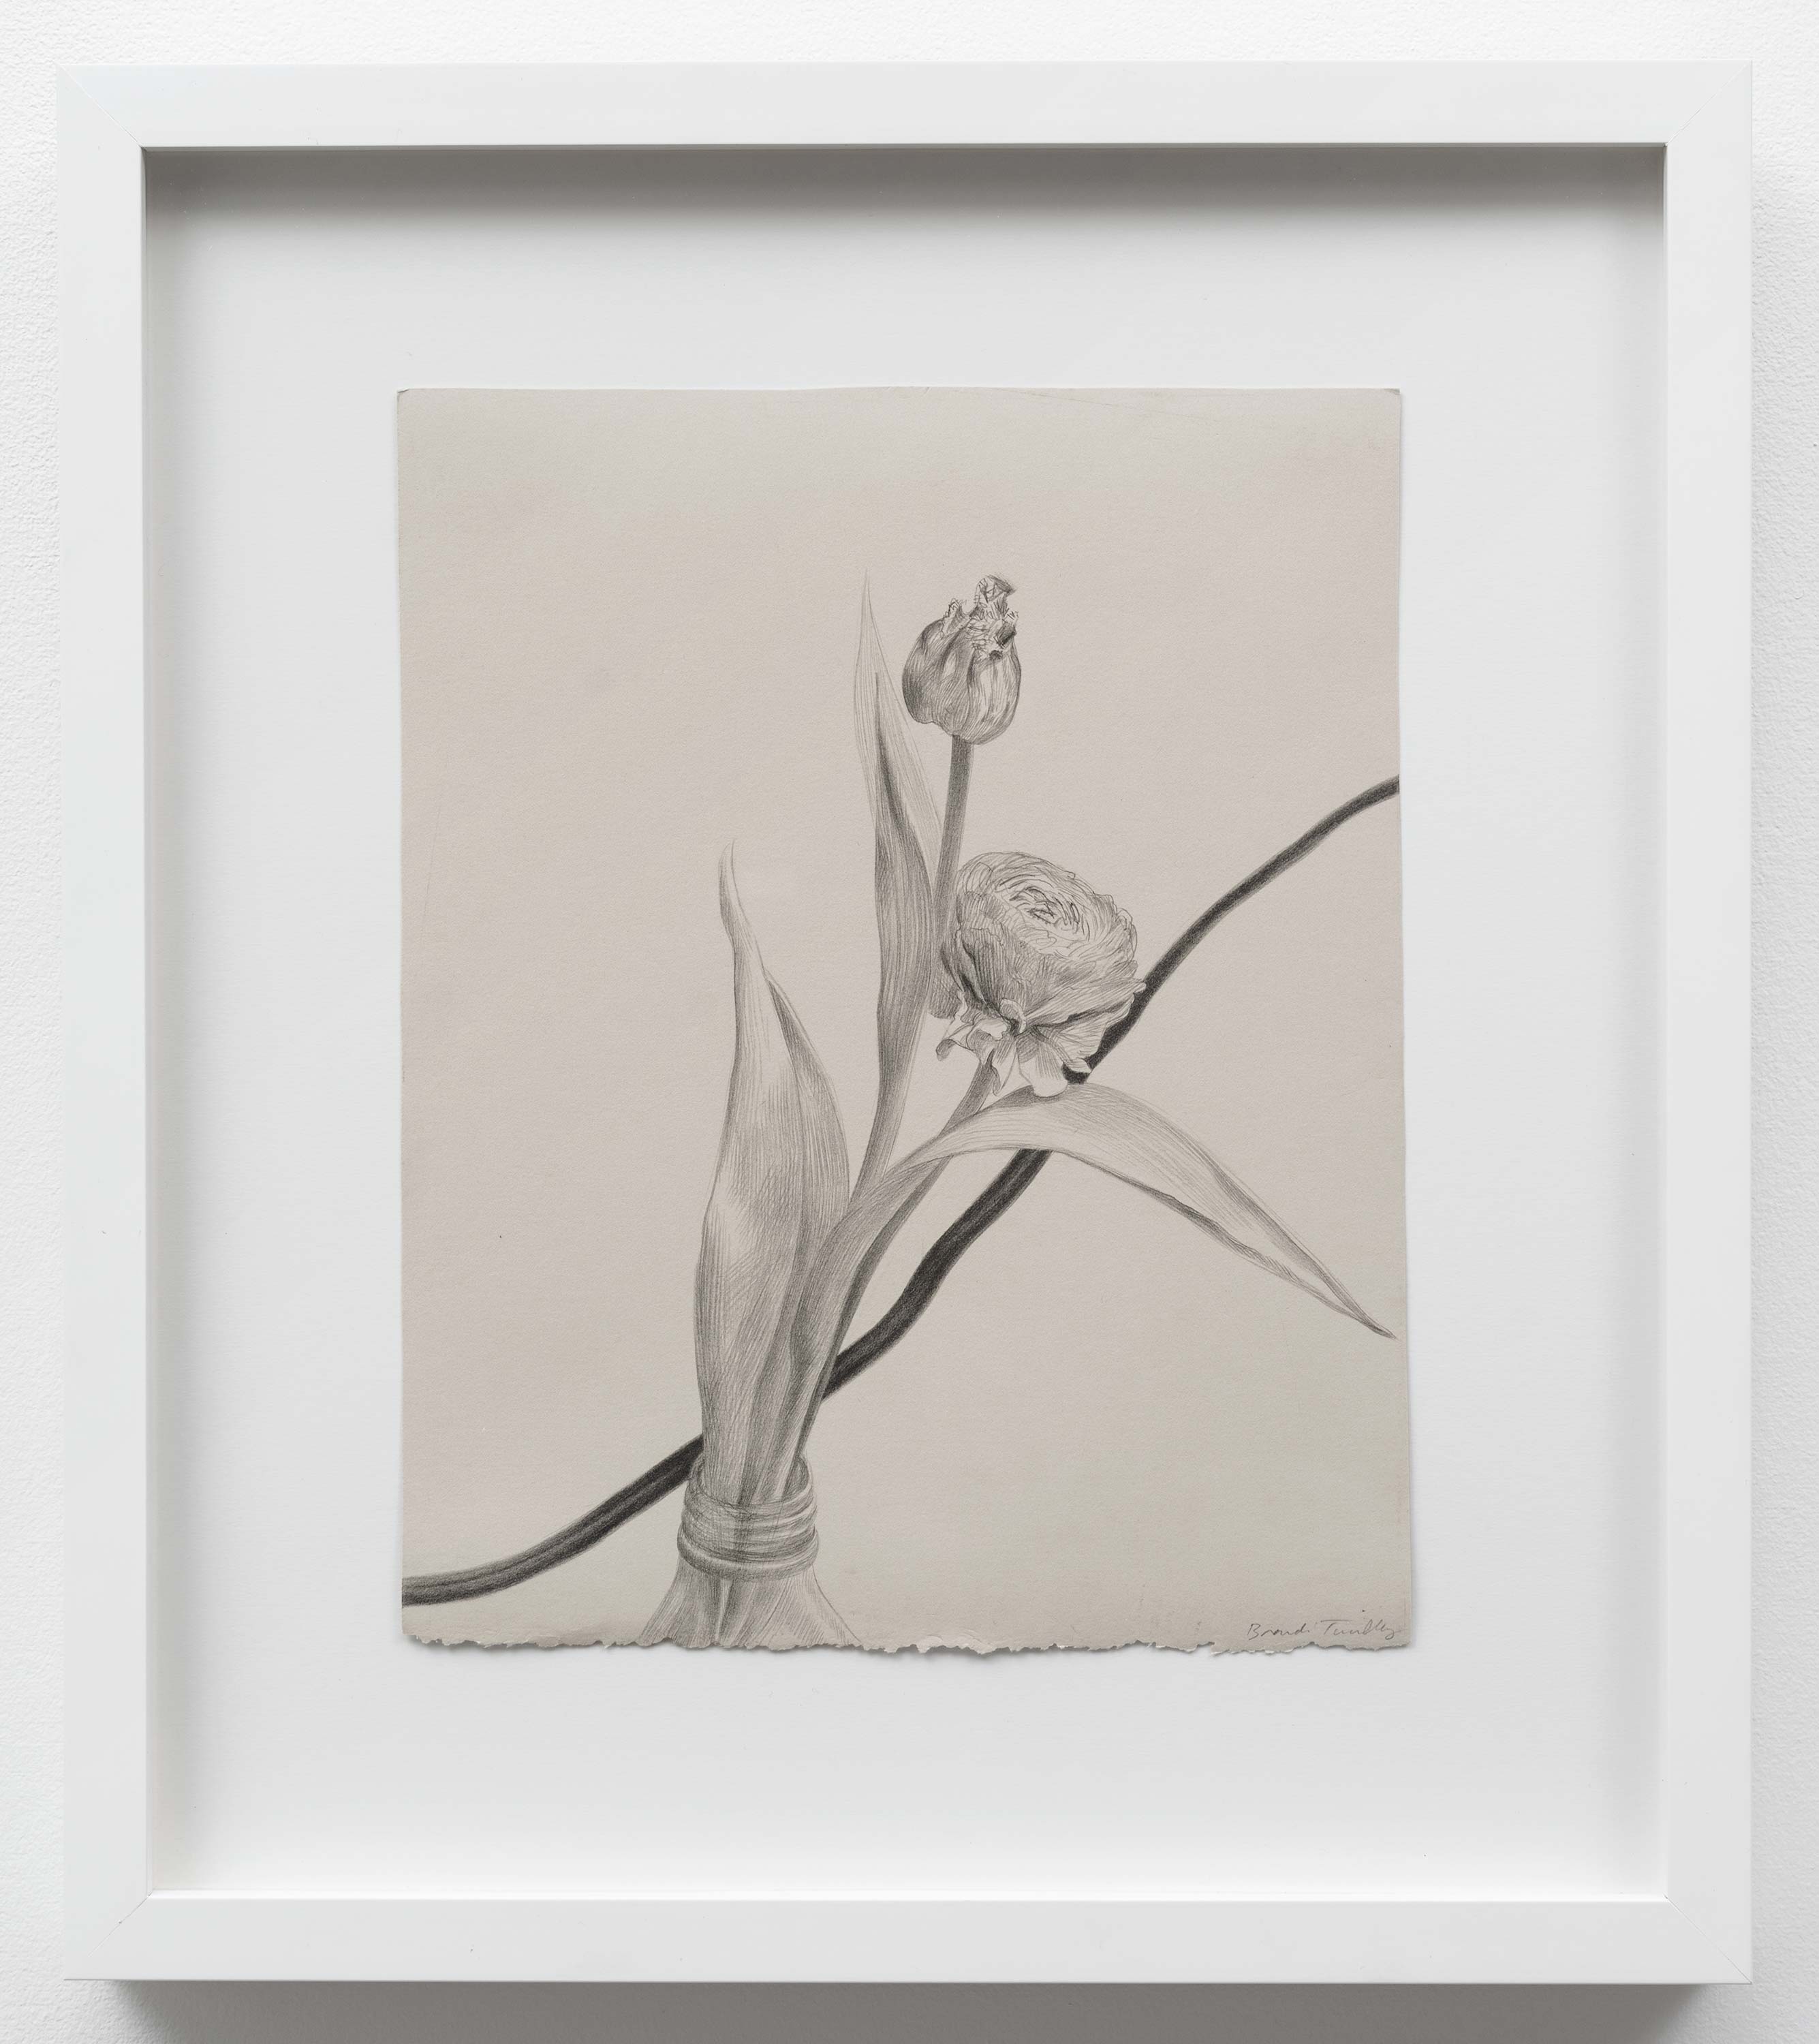 Brandi Twilley<br>Flowers with Cord I<br>2014<br>Graphite on gray paper<br>9 x 11.25 (23 x 26.5 cm)